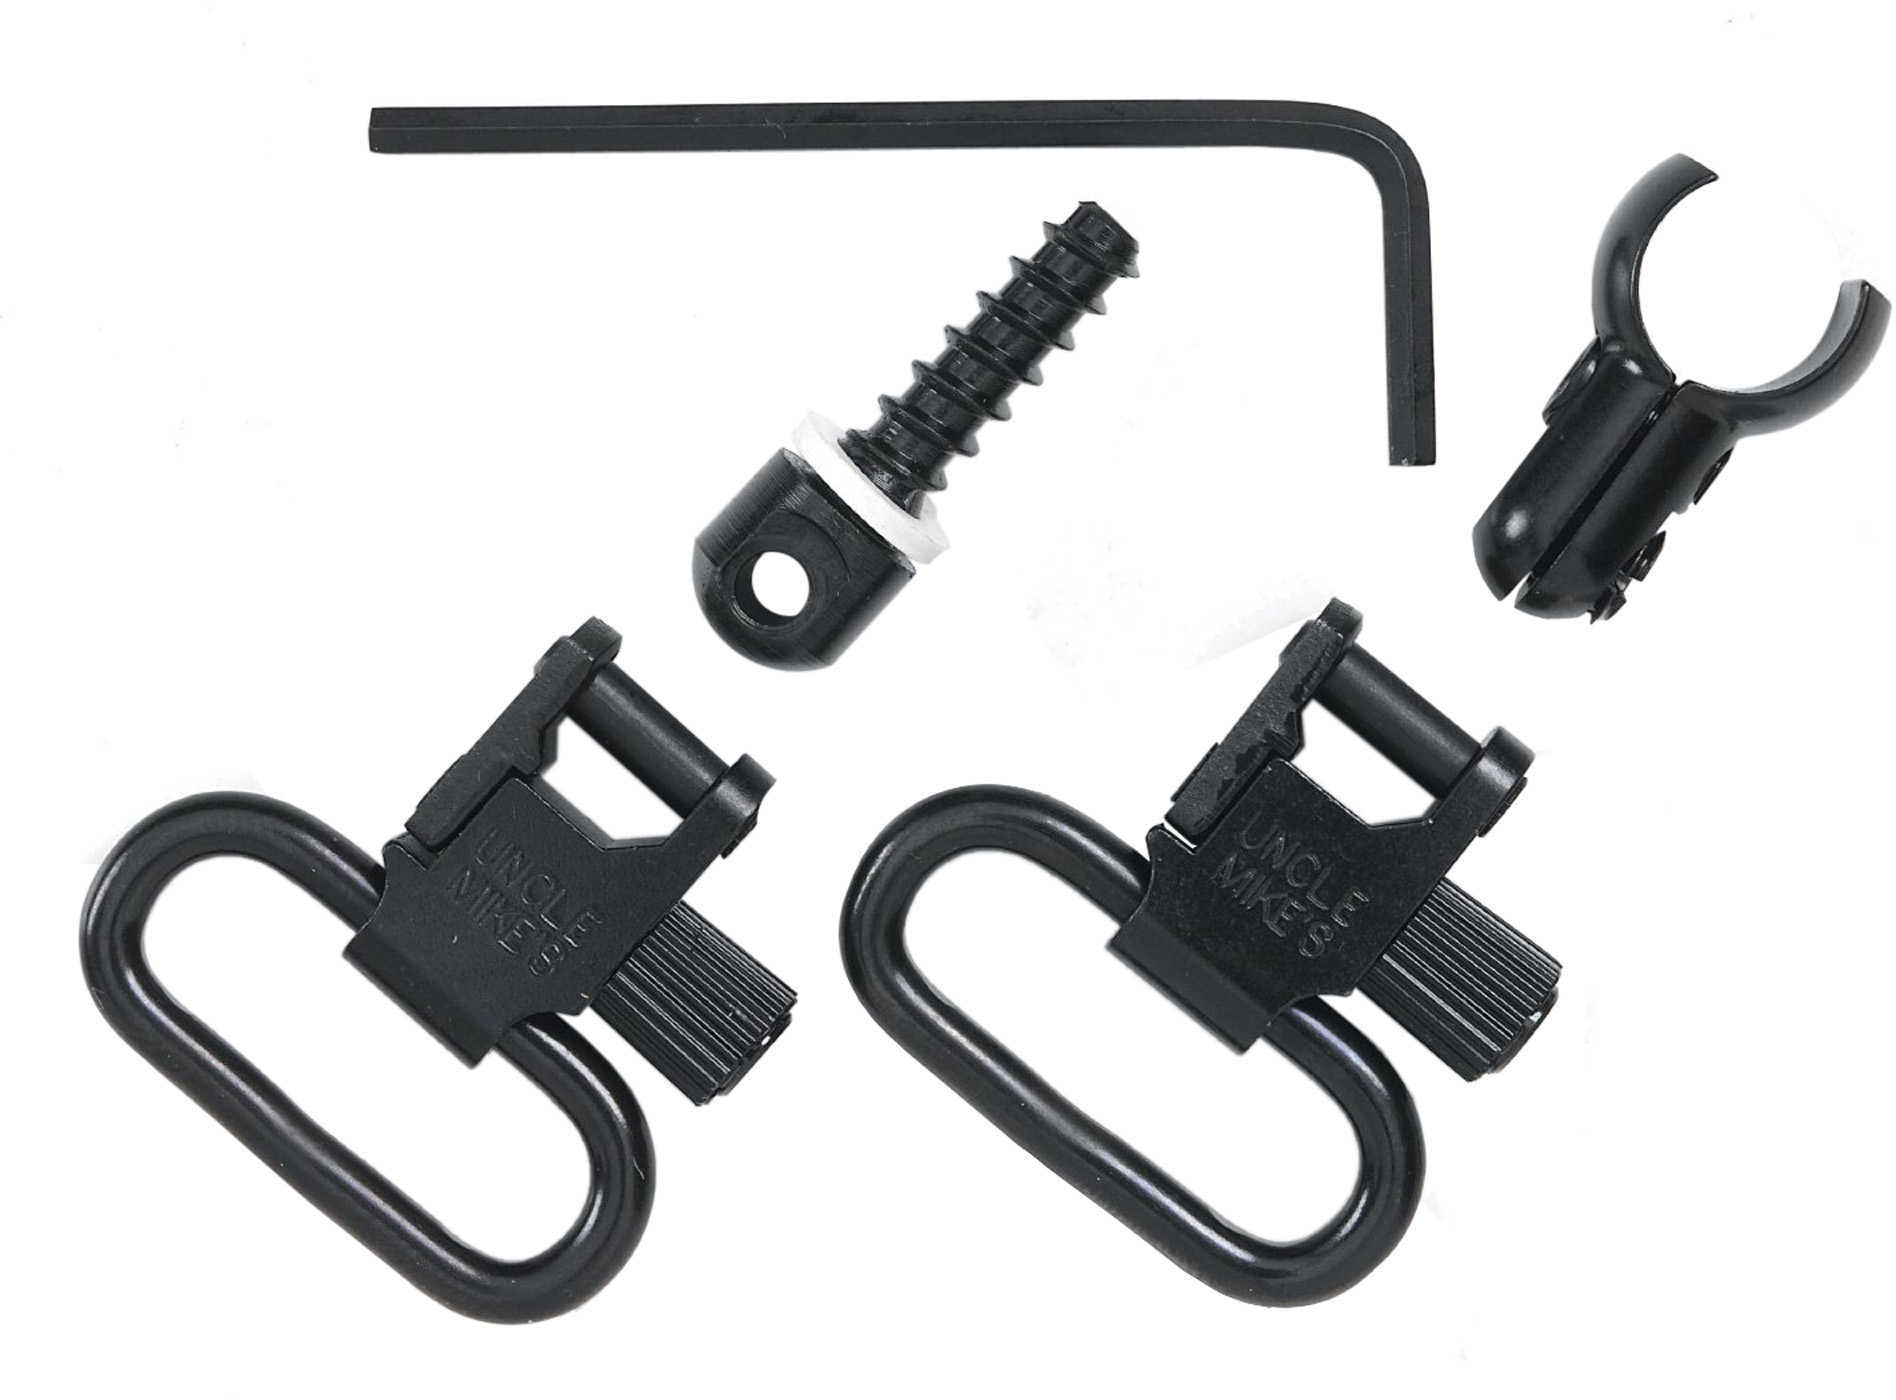 Uncle Mikes QD Super Swivels For Tube Magazine .22S - Magnum Band 115 U22 1" Blued Fits Magazines .420" To